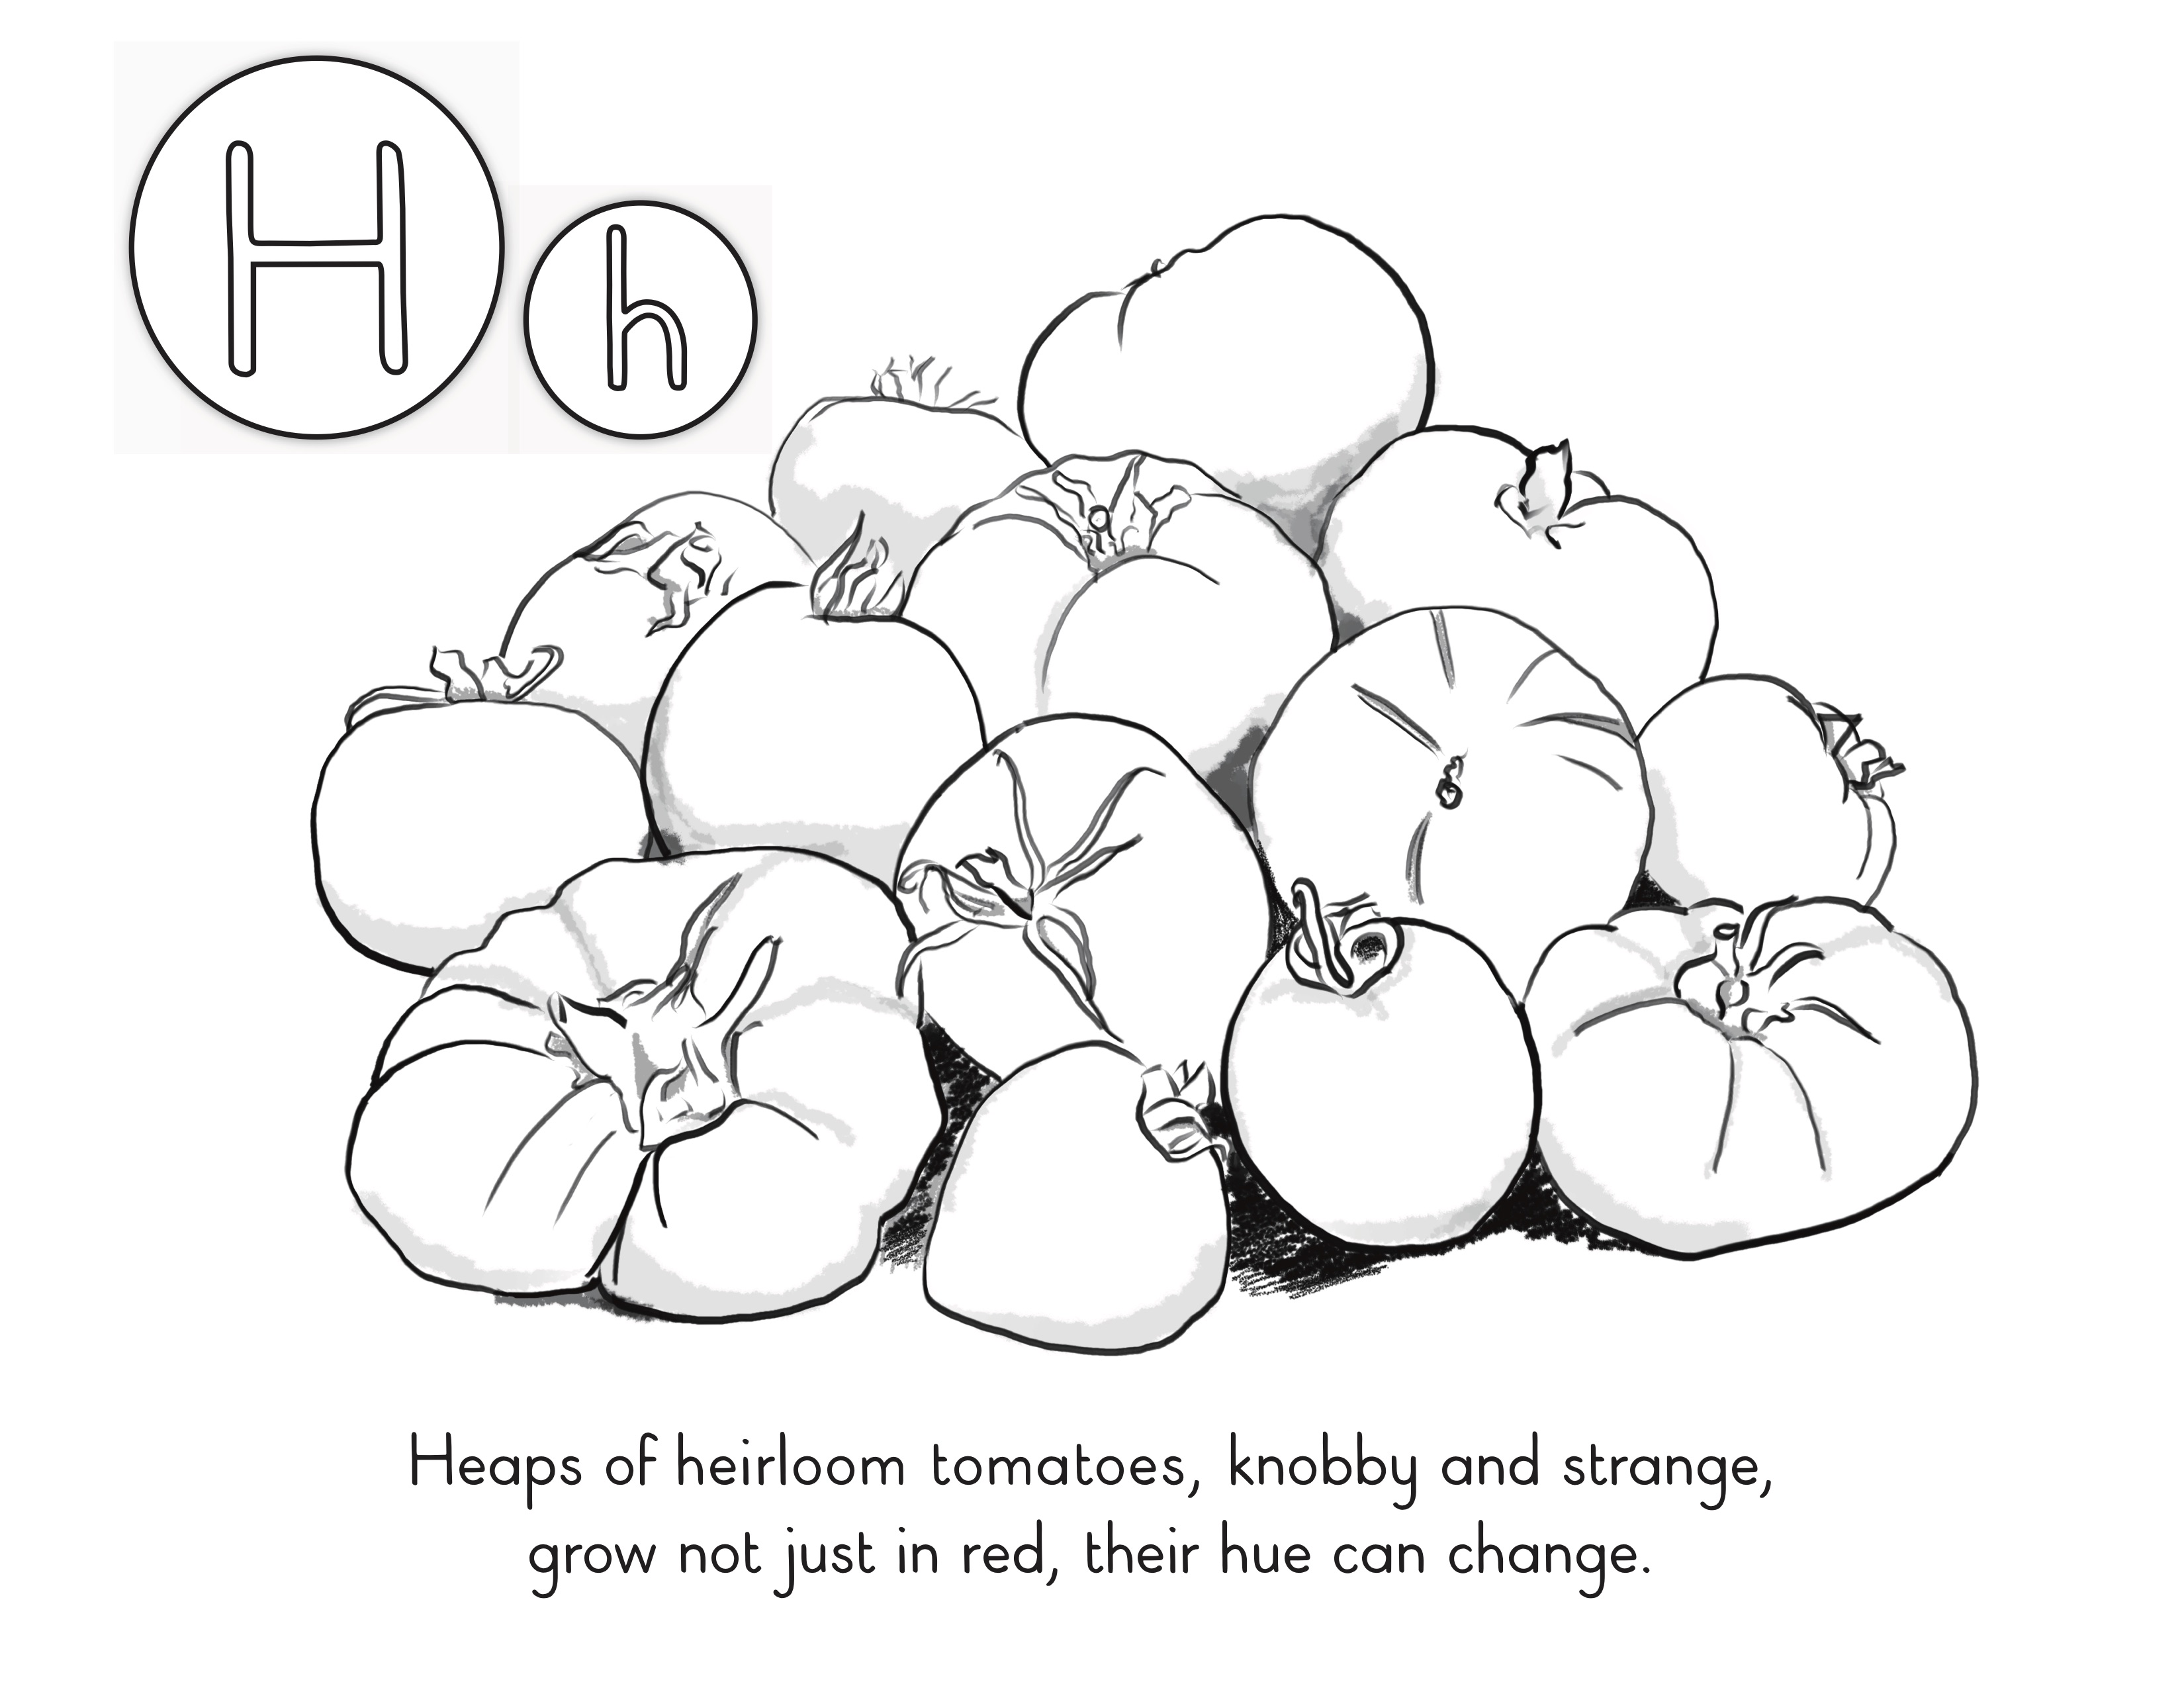 Letter "H" coloring page